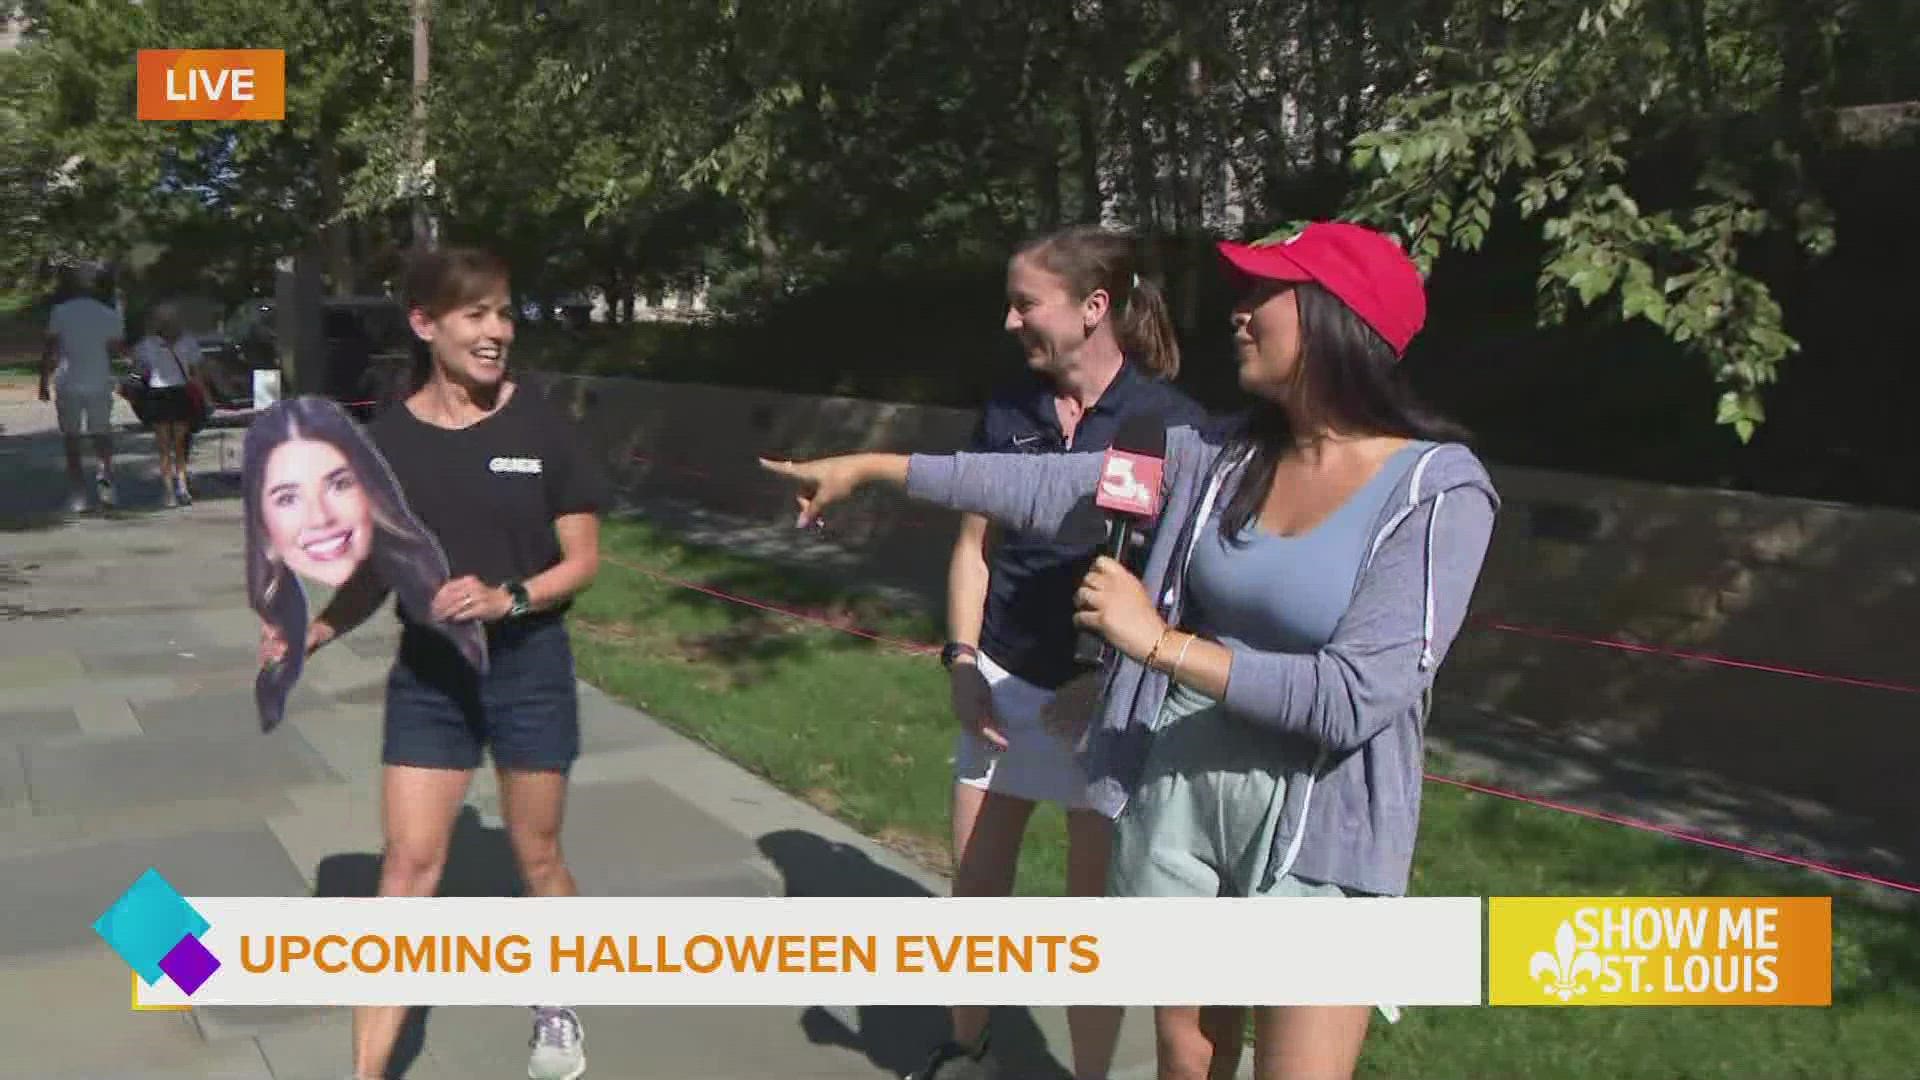 Dana runs through Citygarden to preview MOHIST's Haunted History Walking Tours and The Great GO! St. Louis Halloween Race.